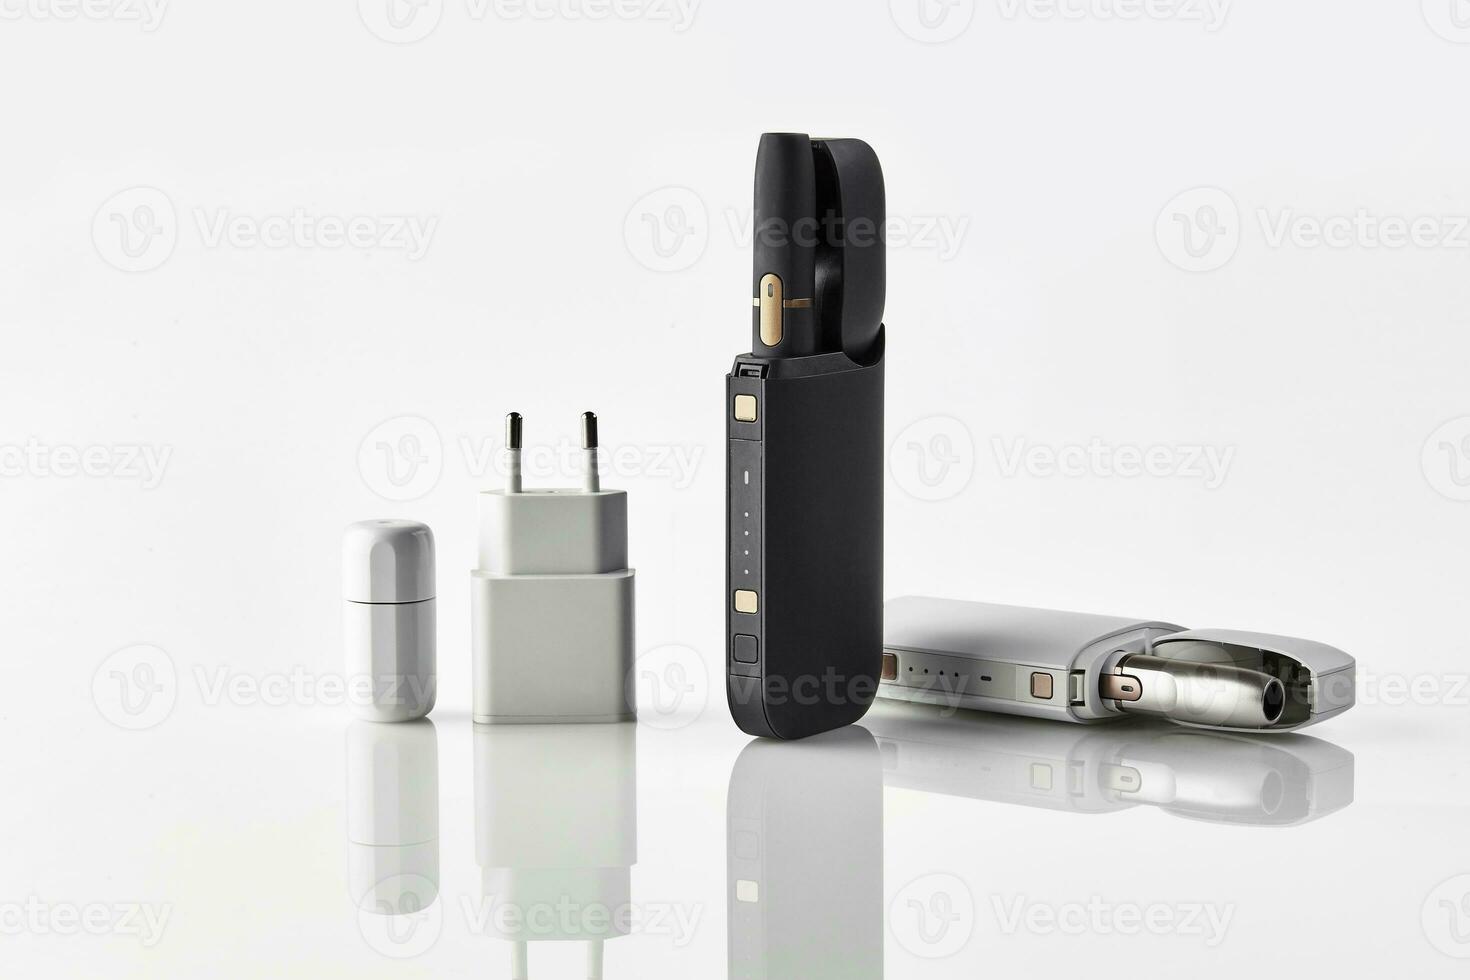 New generation black and white electronic cigarettes and open batteries isolated on white. Hi-tech heating tobacco system. Advertising, close up photo